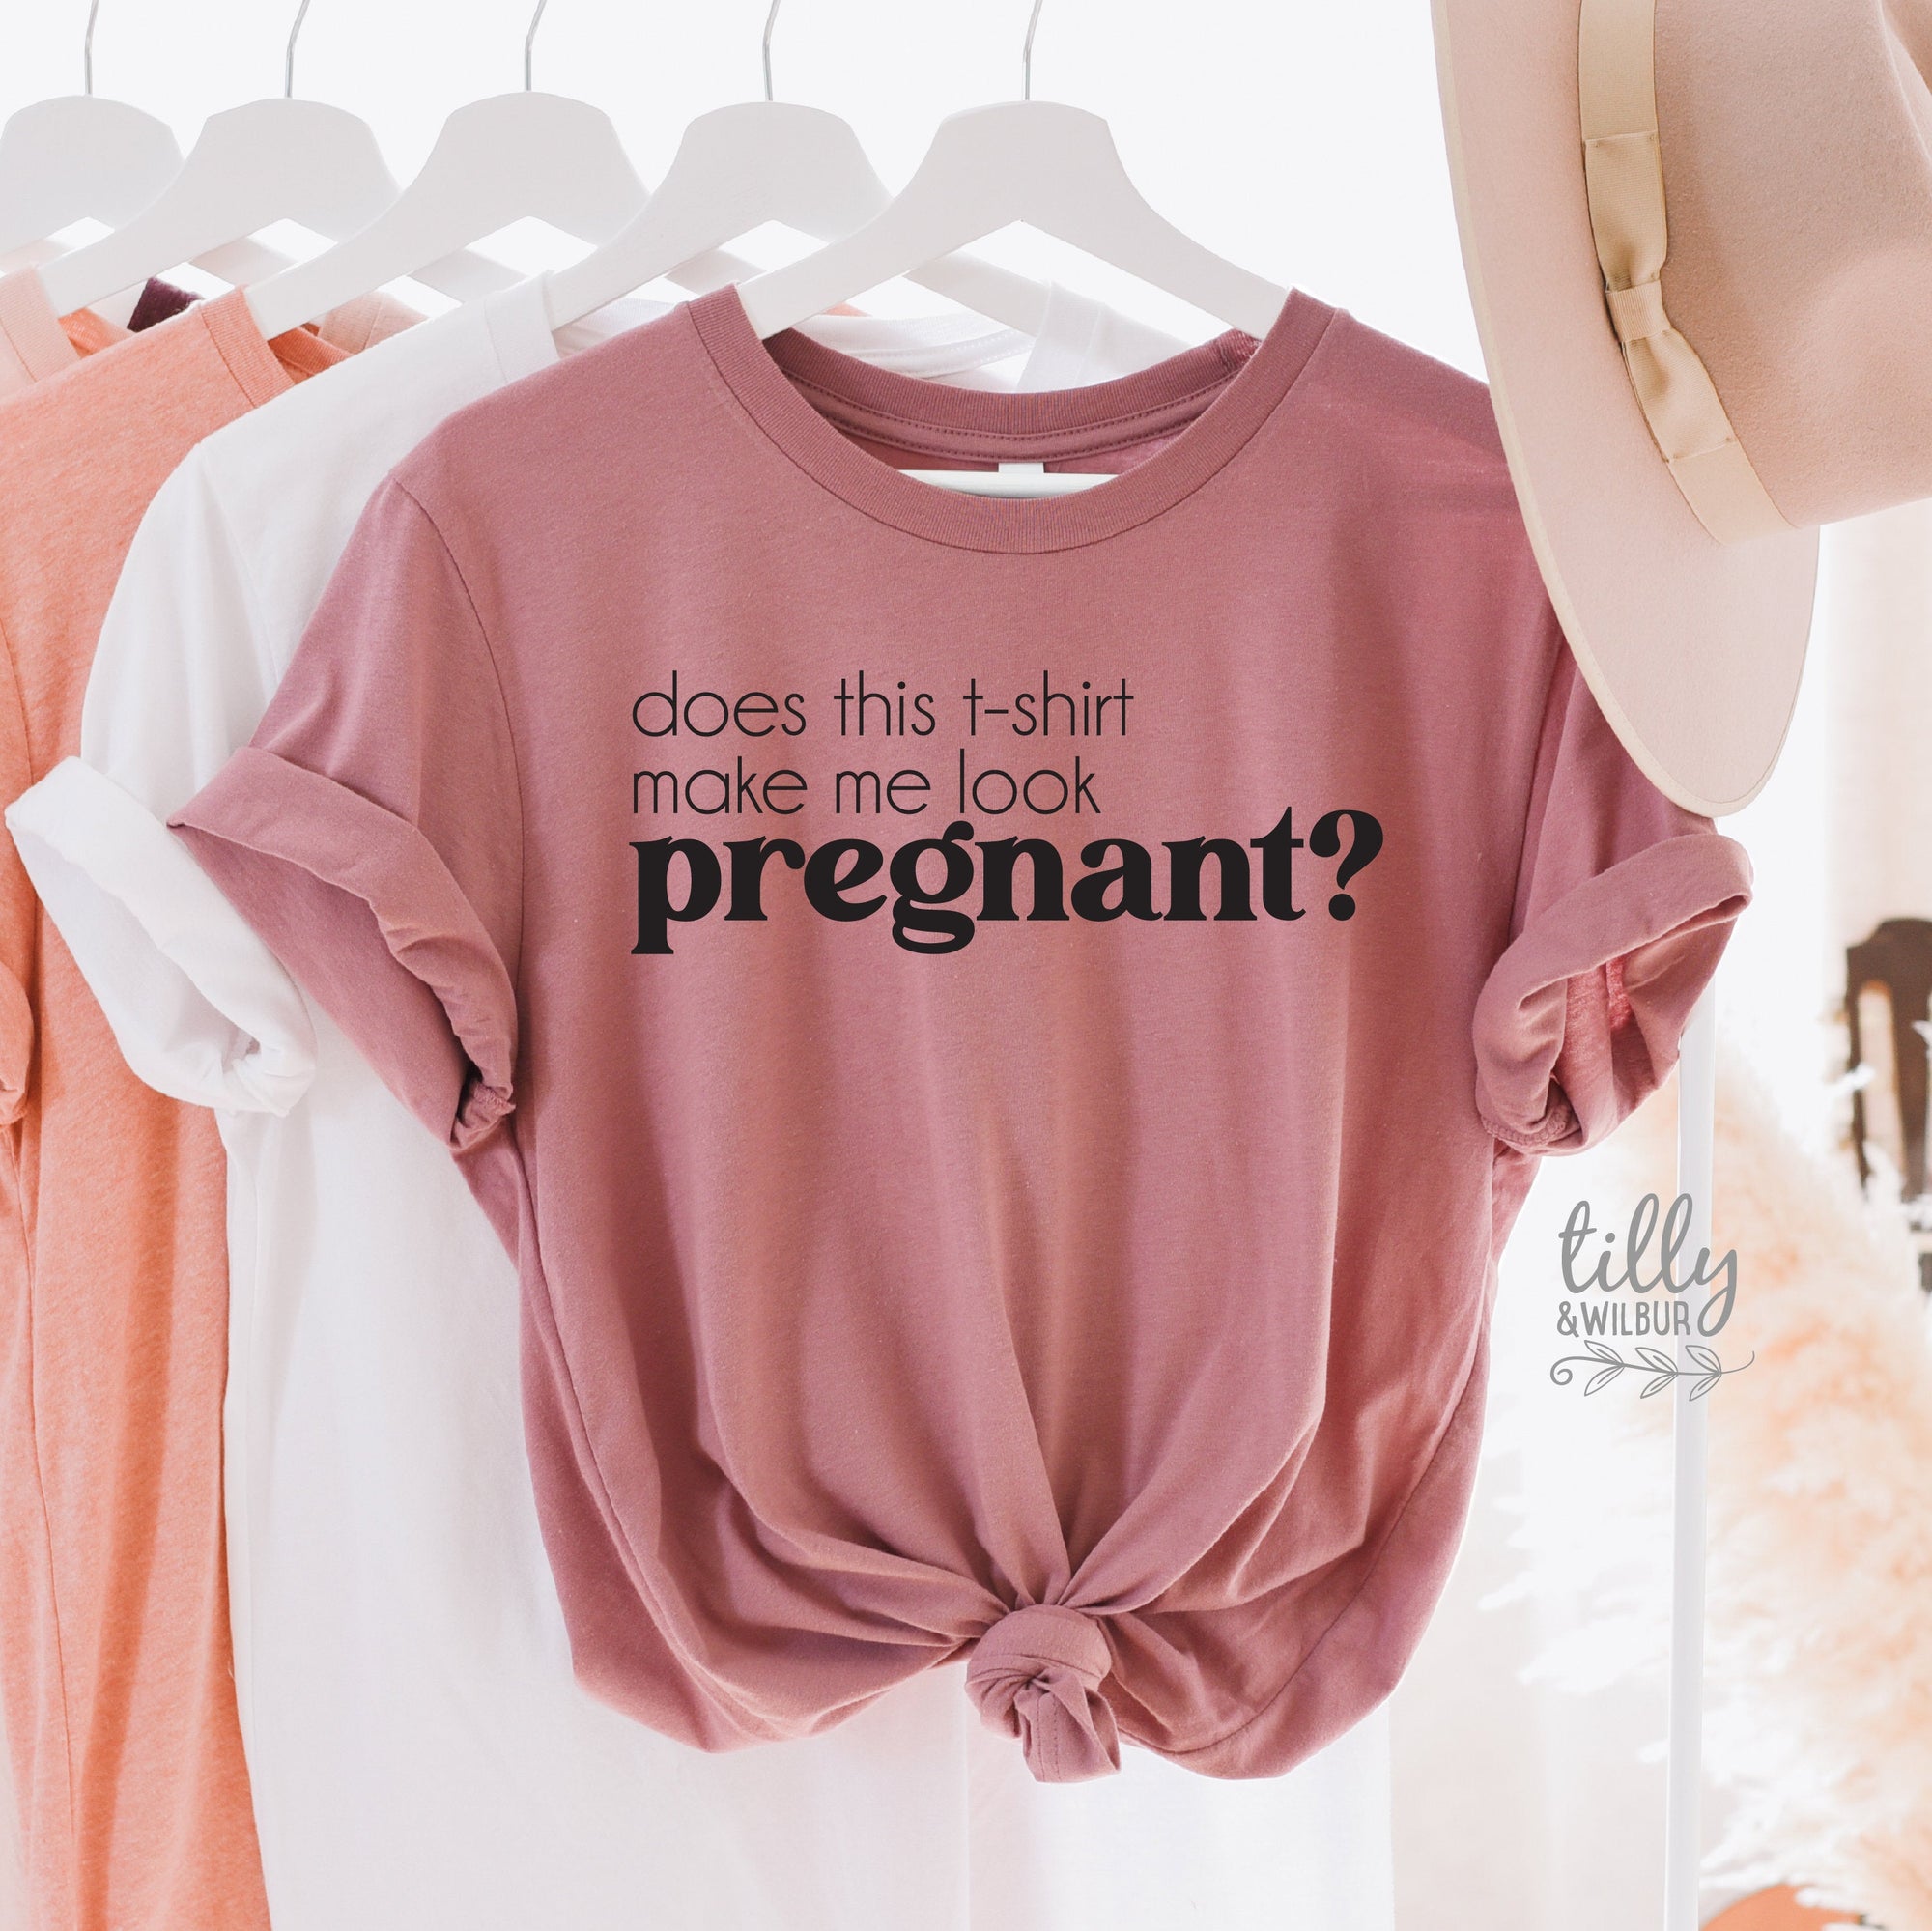 Does This T-Shirt Make Me Look Pregnant?, Pregnancy Announcement T-Shirt, New Mum T-Shirt, Funny Pregnancy Announcement T-Shirt, Baby Shower